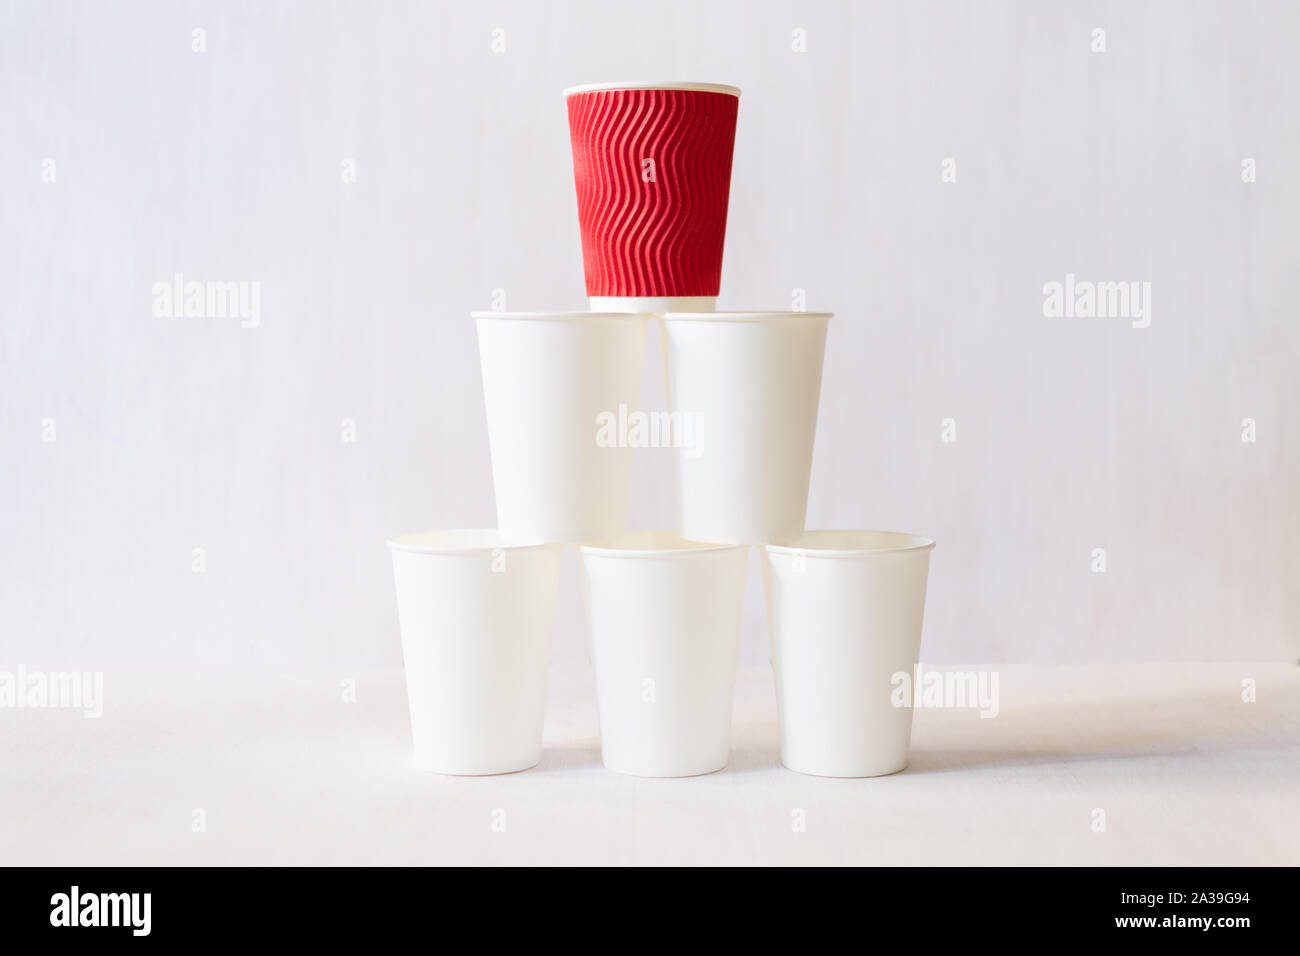 https://c8.alamy.com/comp/2A39G94/red-paper-coffee-cup-stands-on-top-of-white-paper-cups-pyramid-white-background-copy-space-2A39G94.jpg